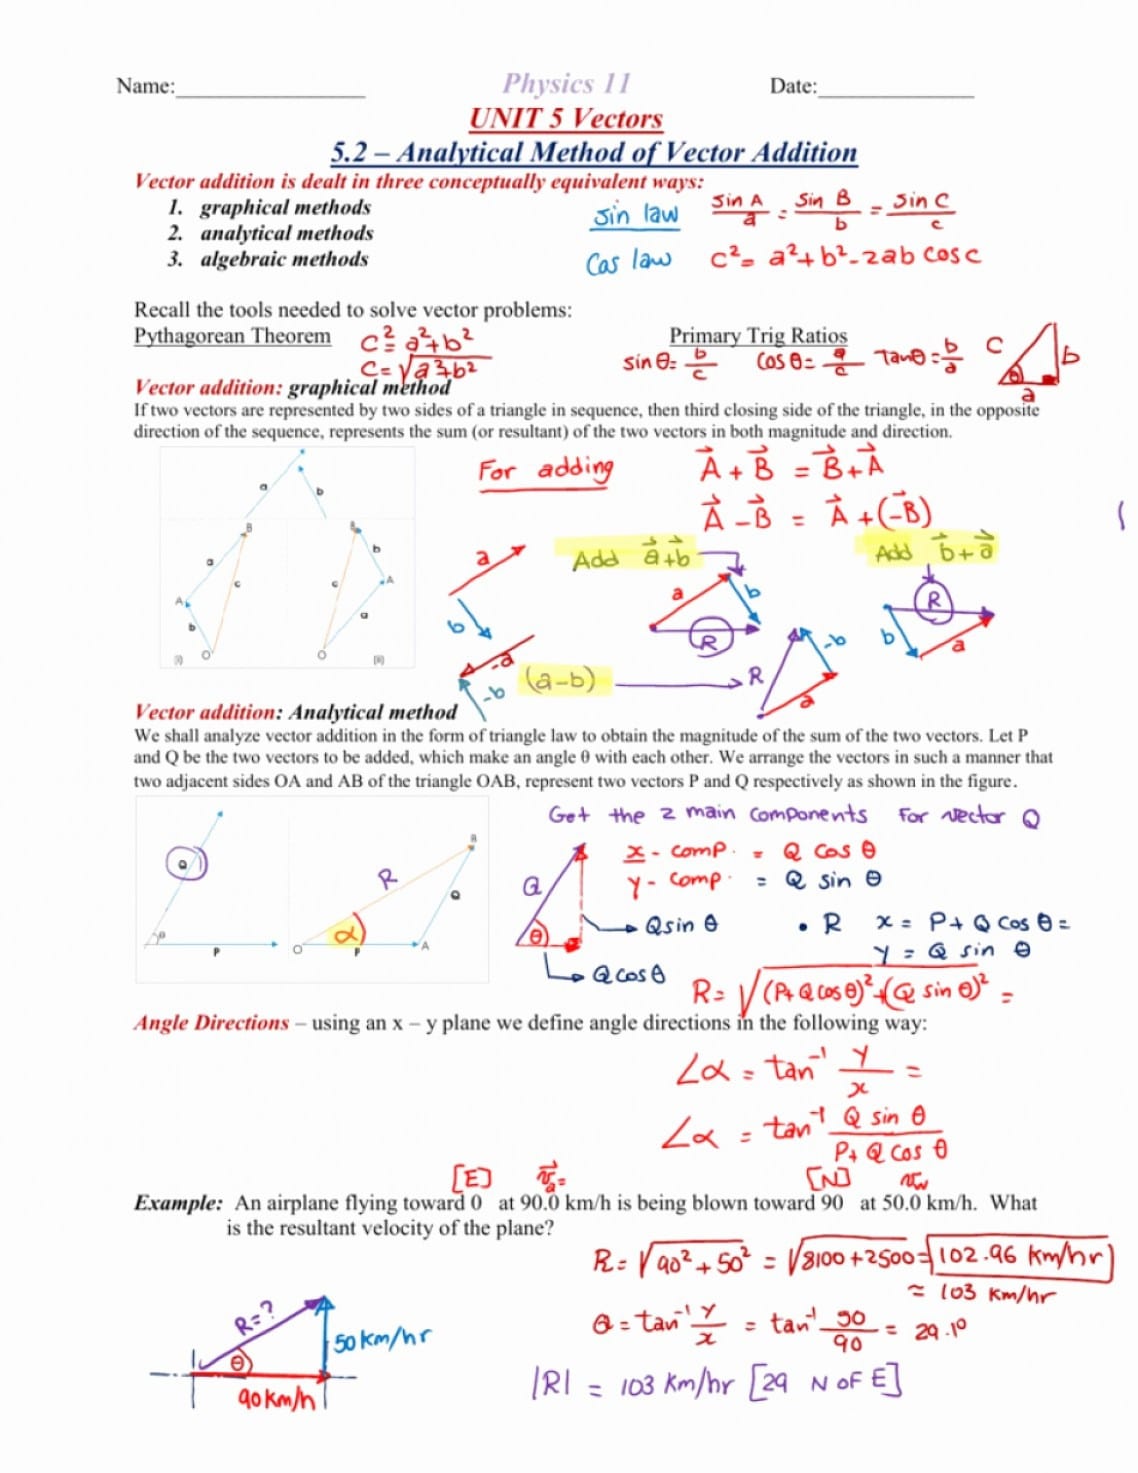 two-dimensional-motion-and-vectors-worksheet-answers-awesome-db-excel